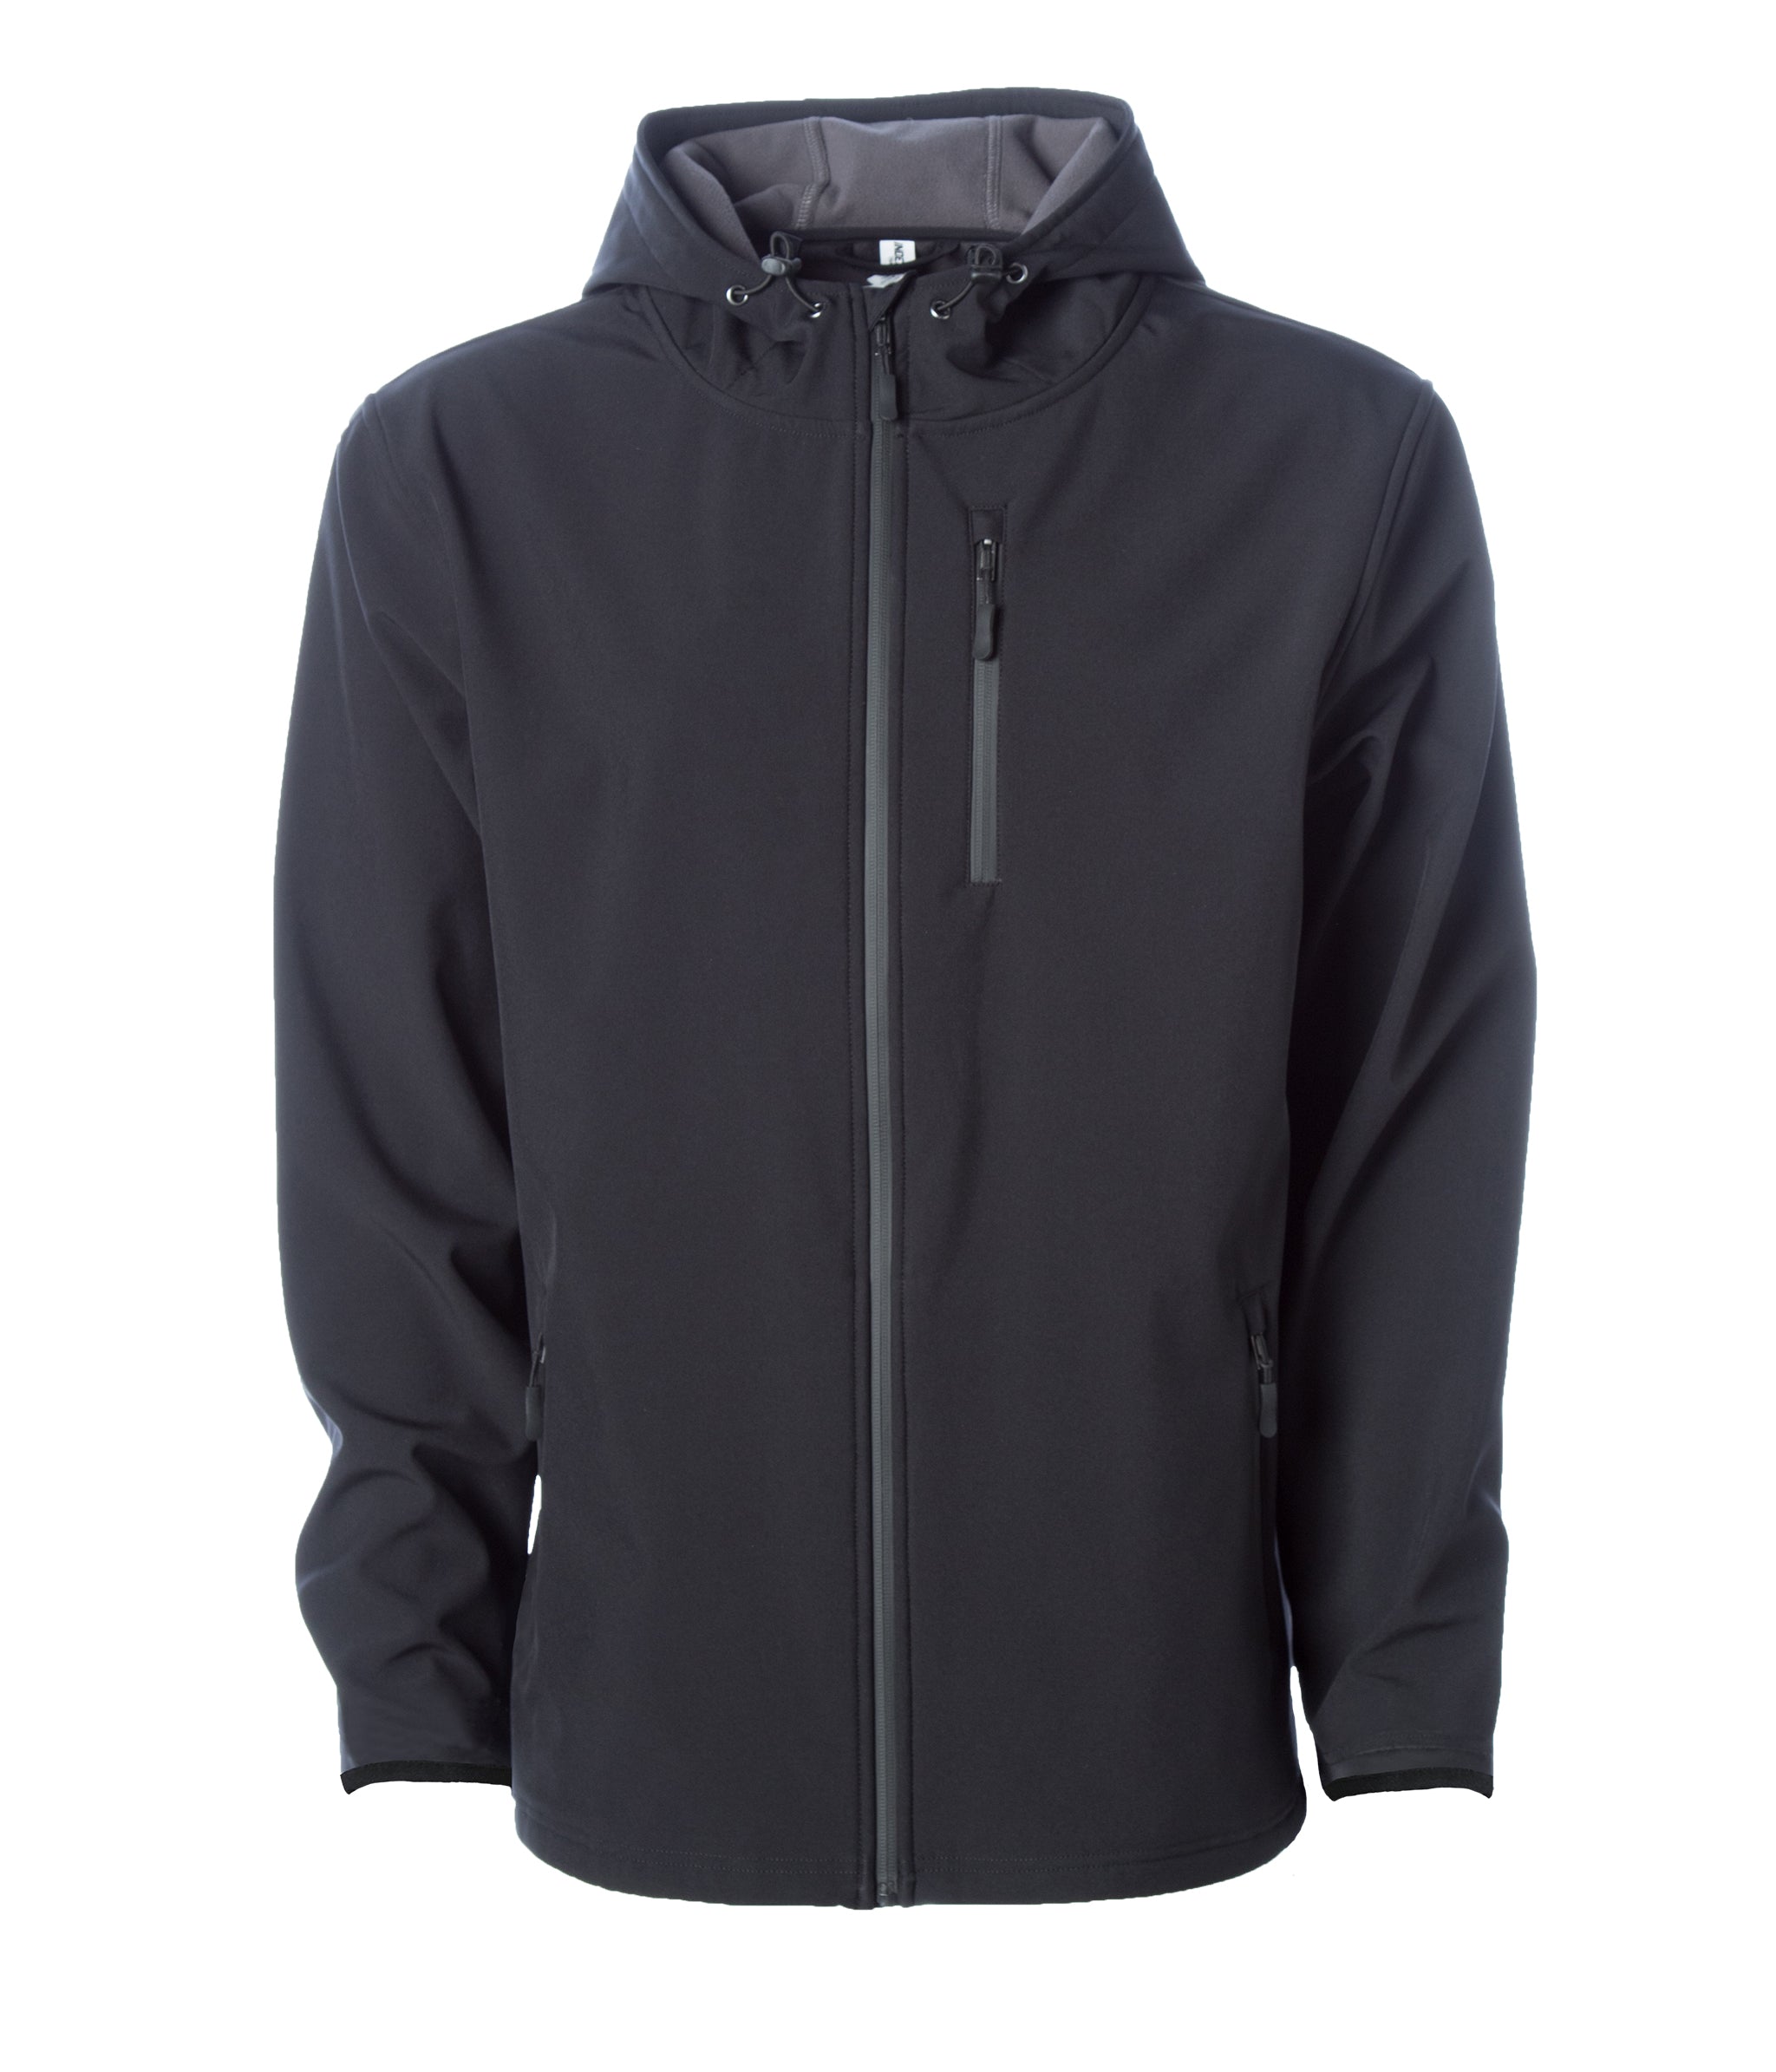 Men's Poly-Tech Shell Jacket Independent Trading Company